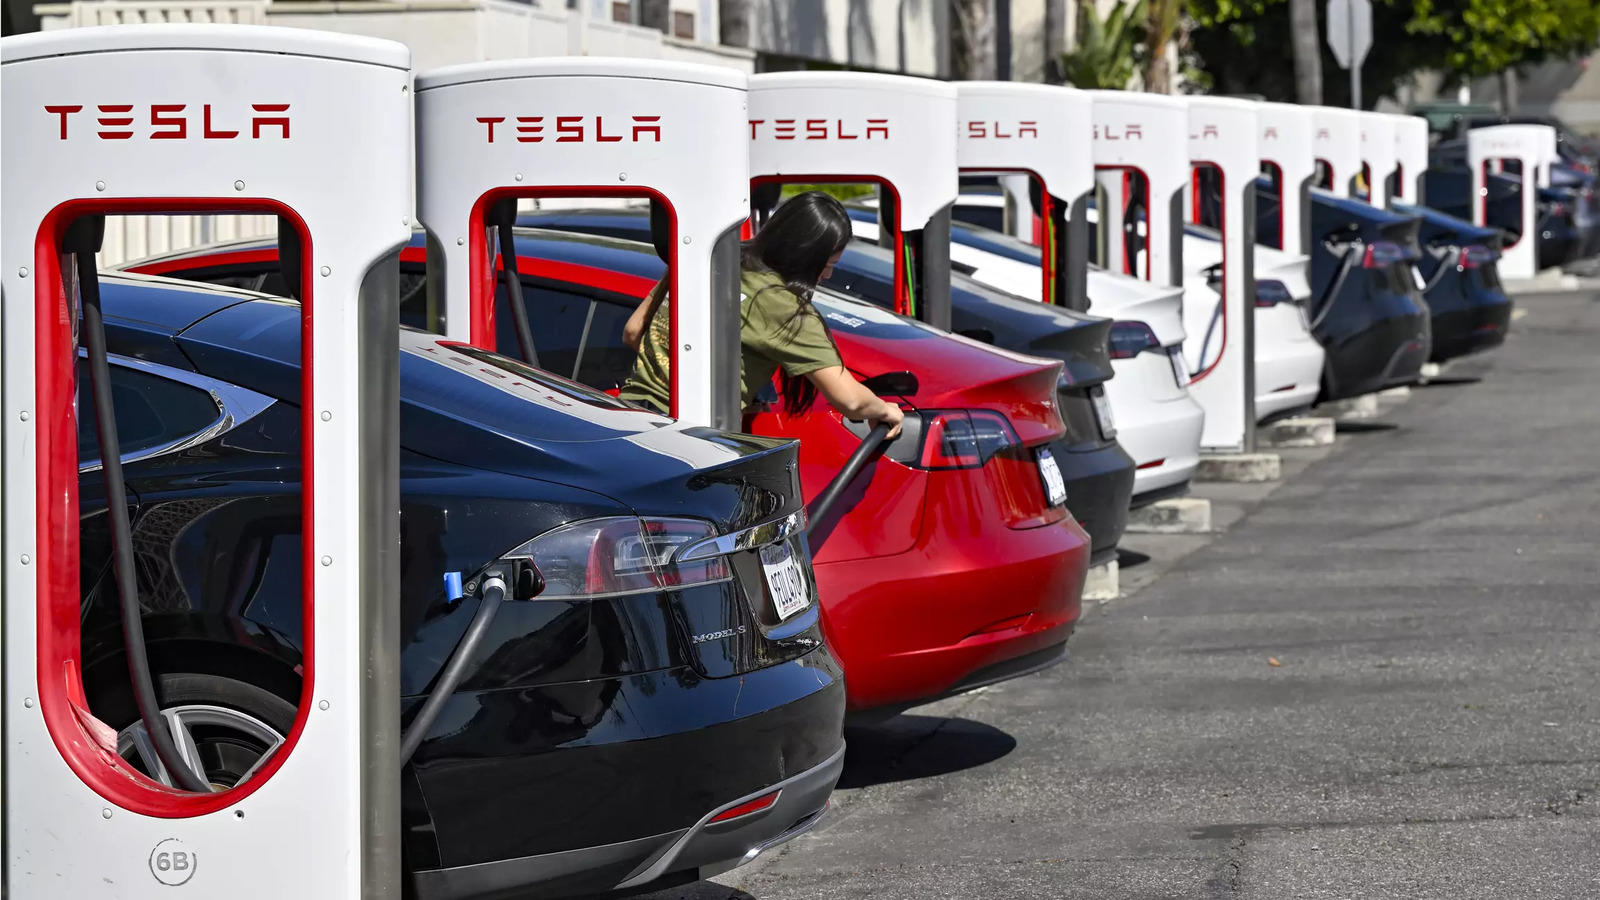 Tesla's Tough Times Why the Electric Car Giant Is Slowing Down Amidst Rising Competition